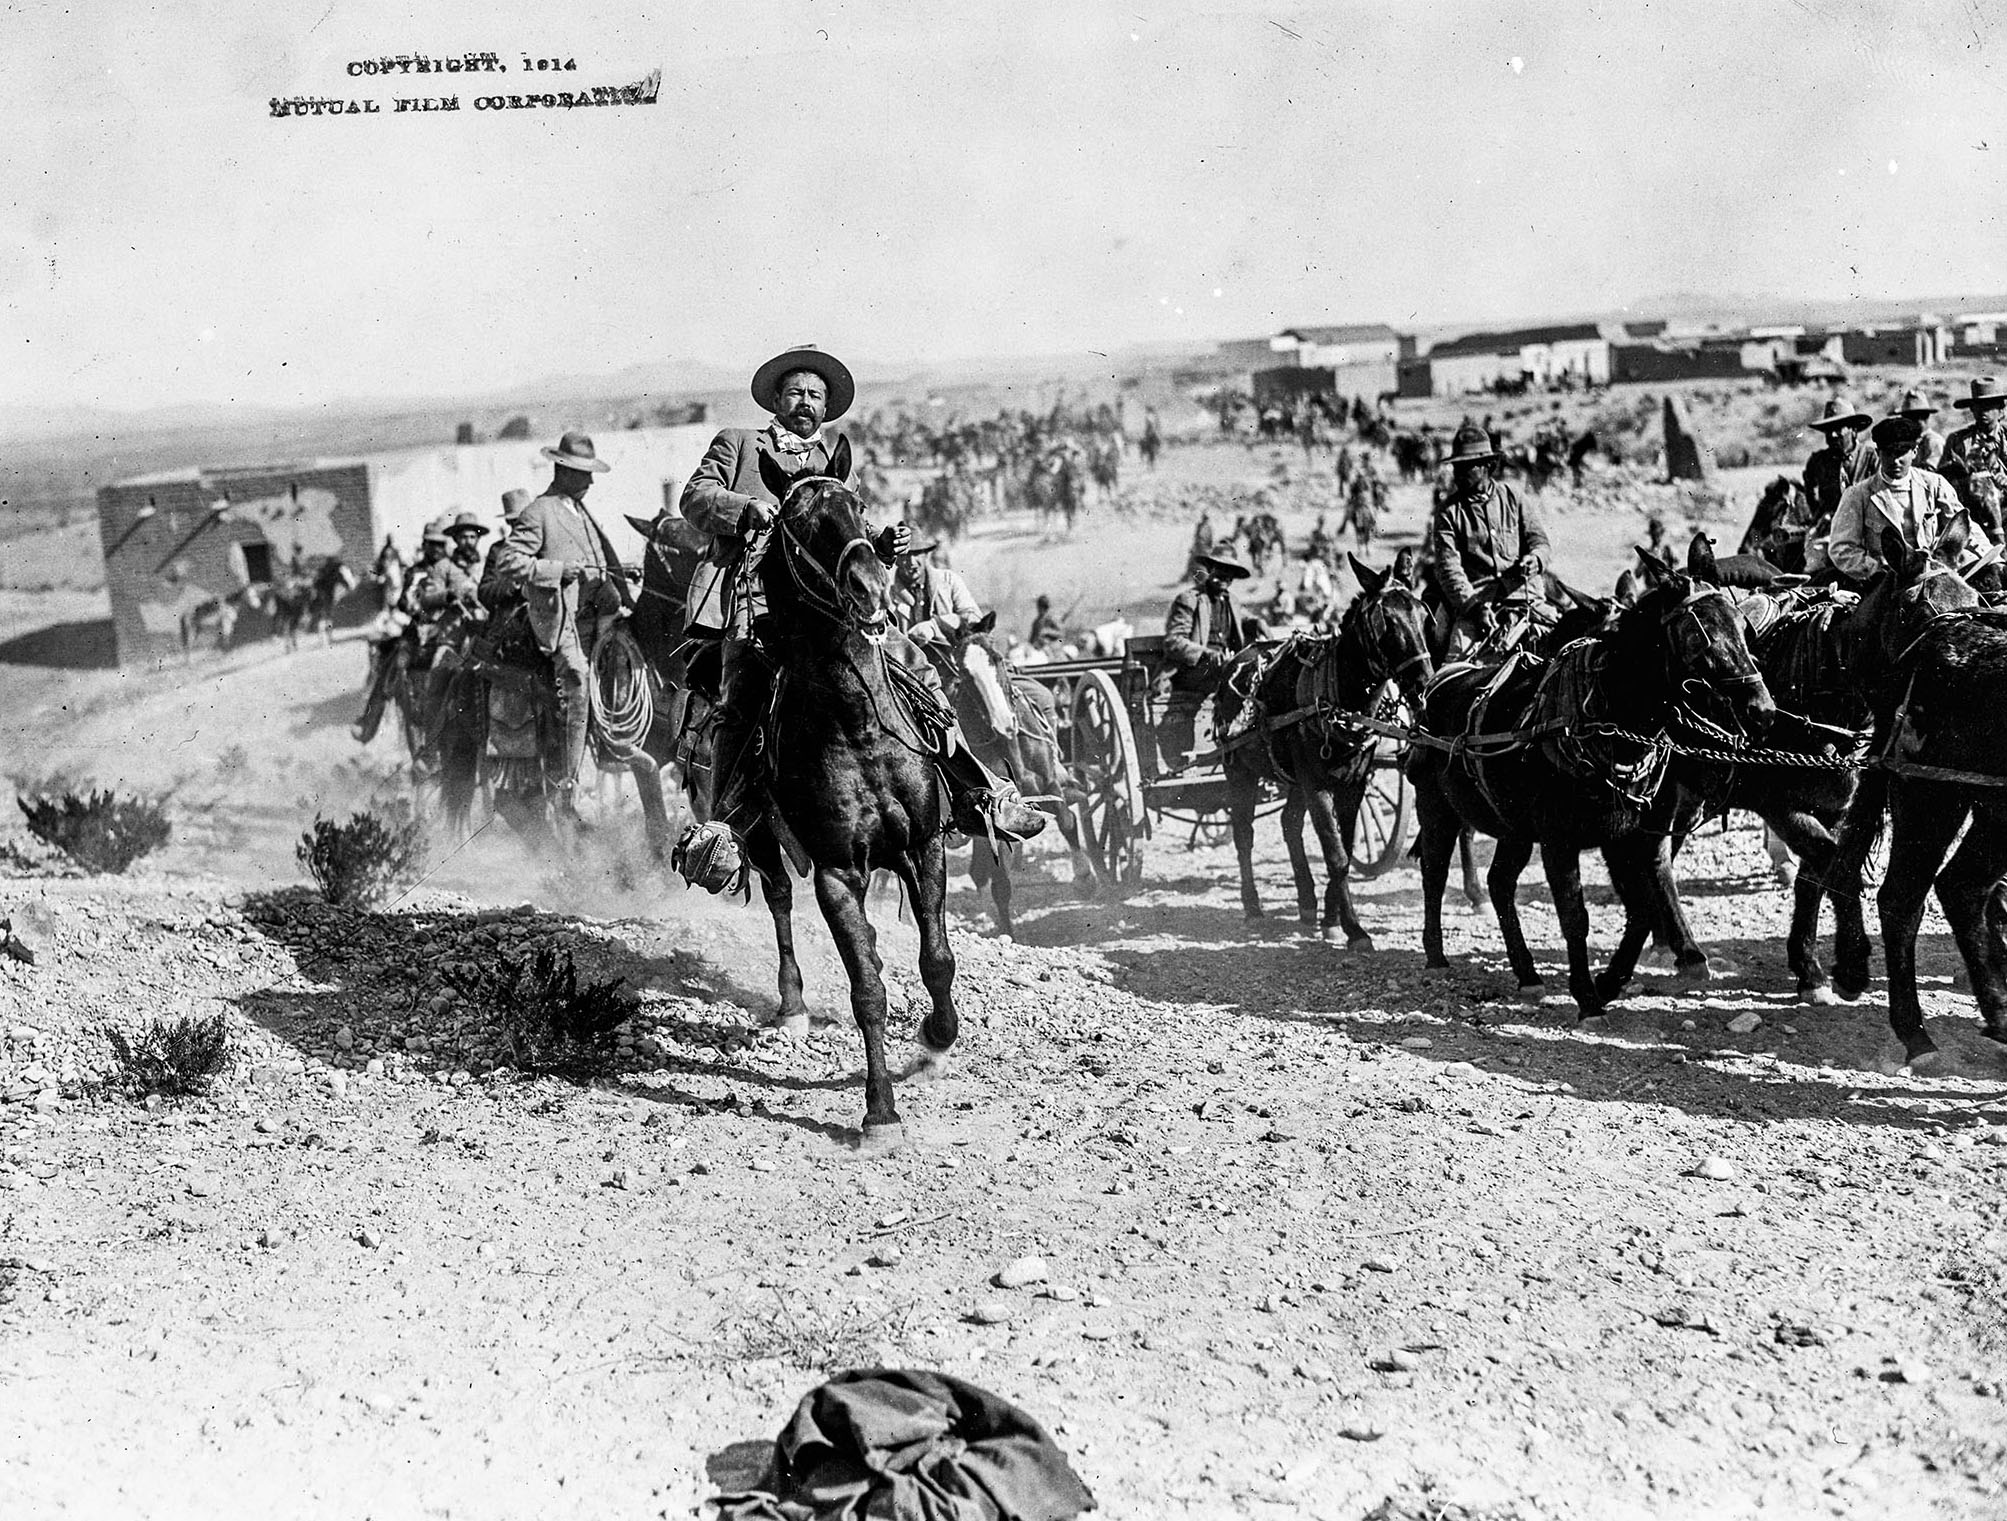 A man in a cowboy hat rides a horse along with a large line of horses